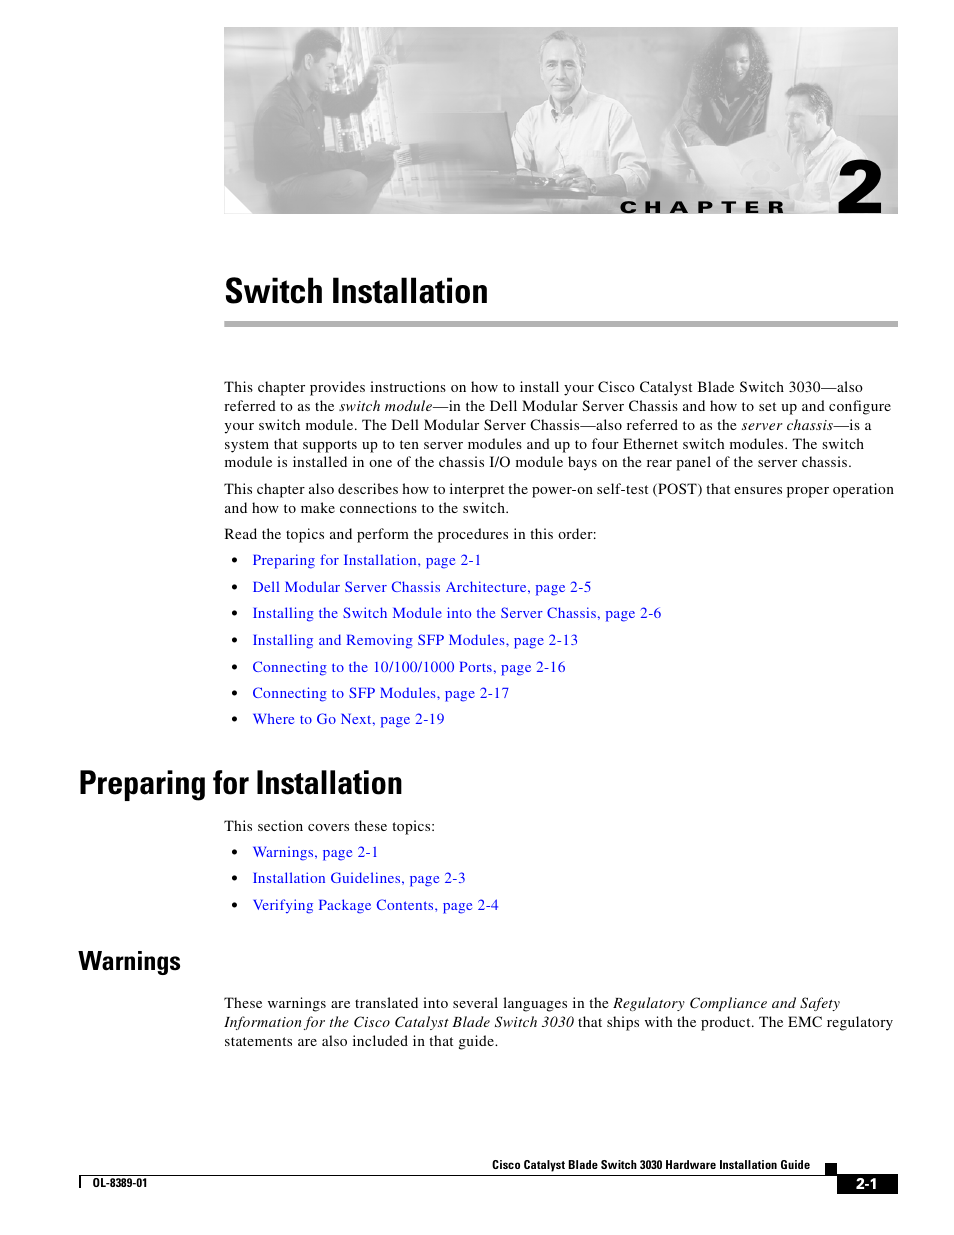 Switch installation, Preparing for installation, Warnings | C h a p t e r, Chapter 2, “switch installation | Cisco 3030 User Manual | Page 29 / 72